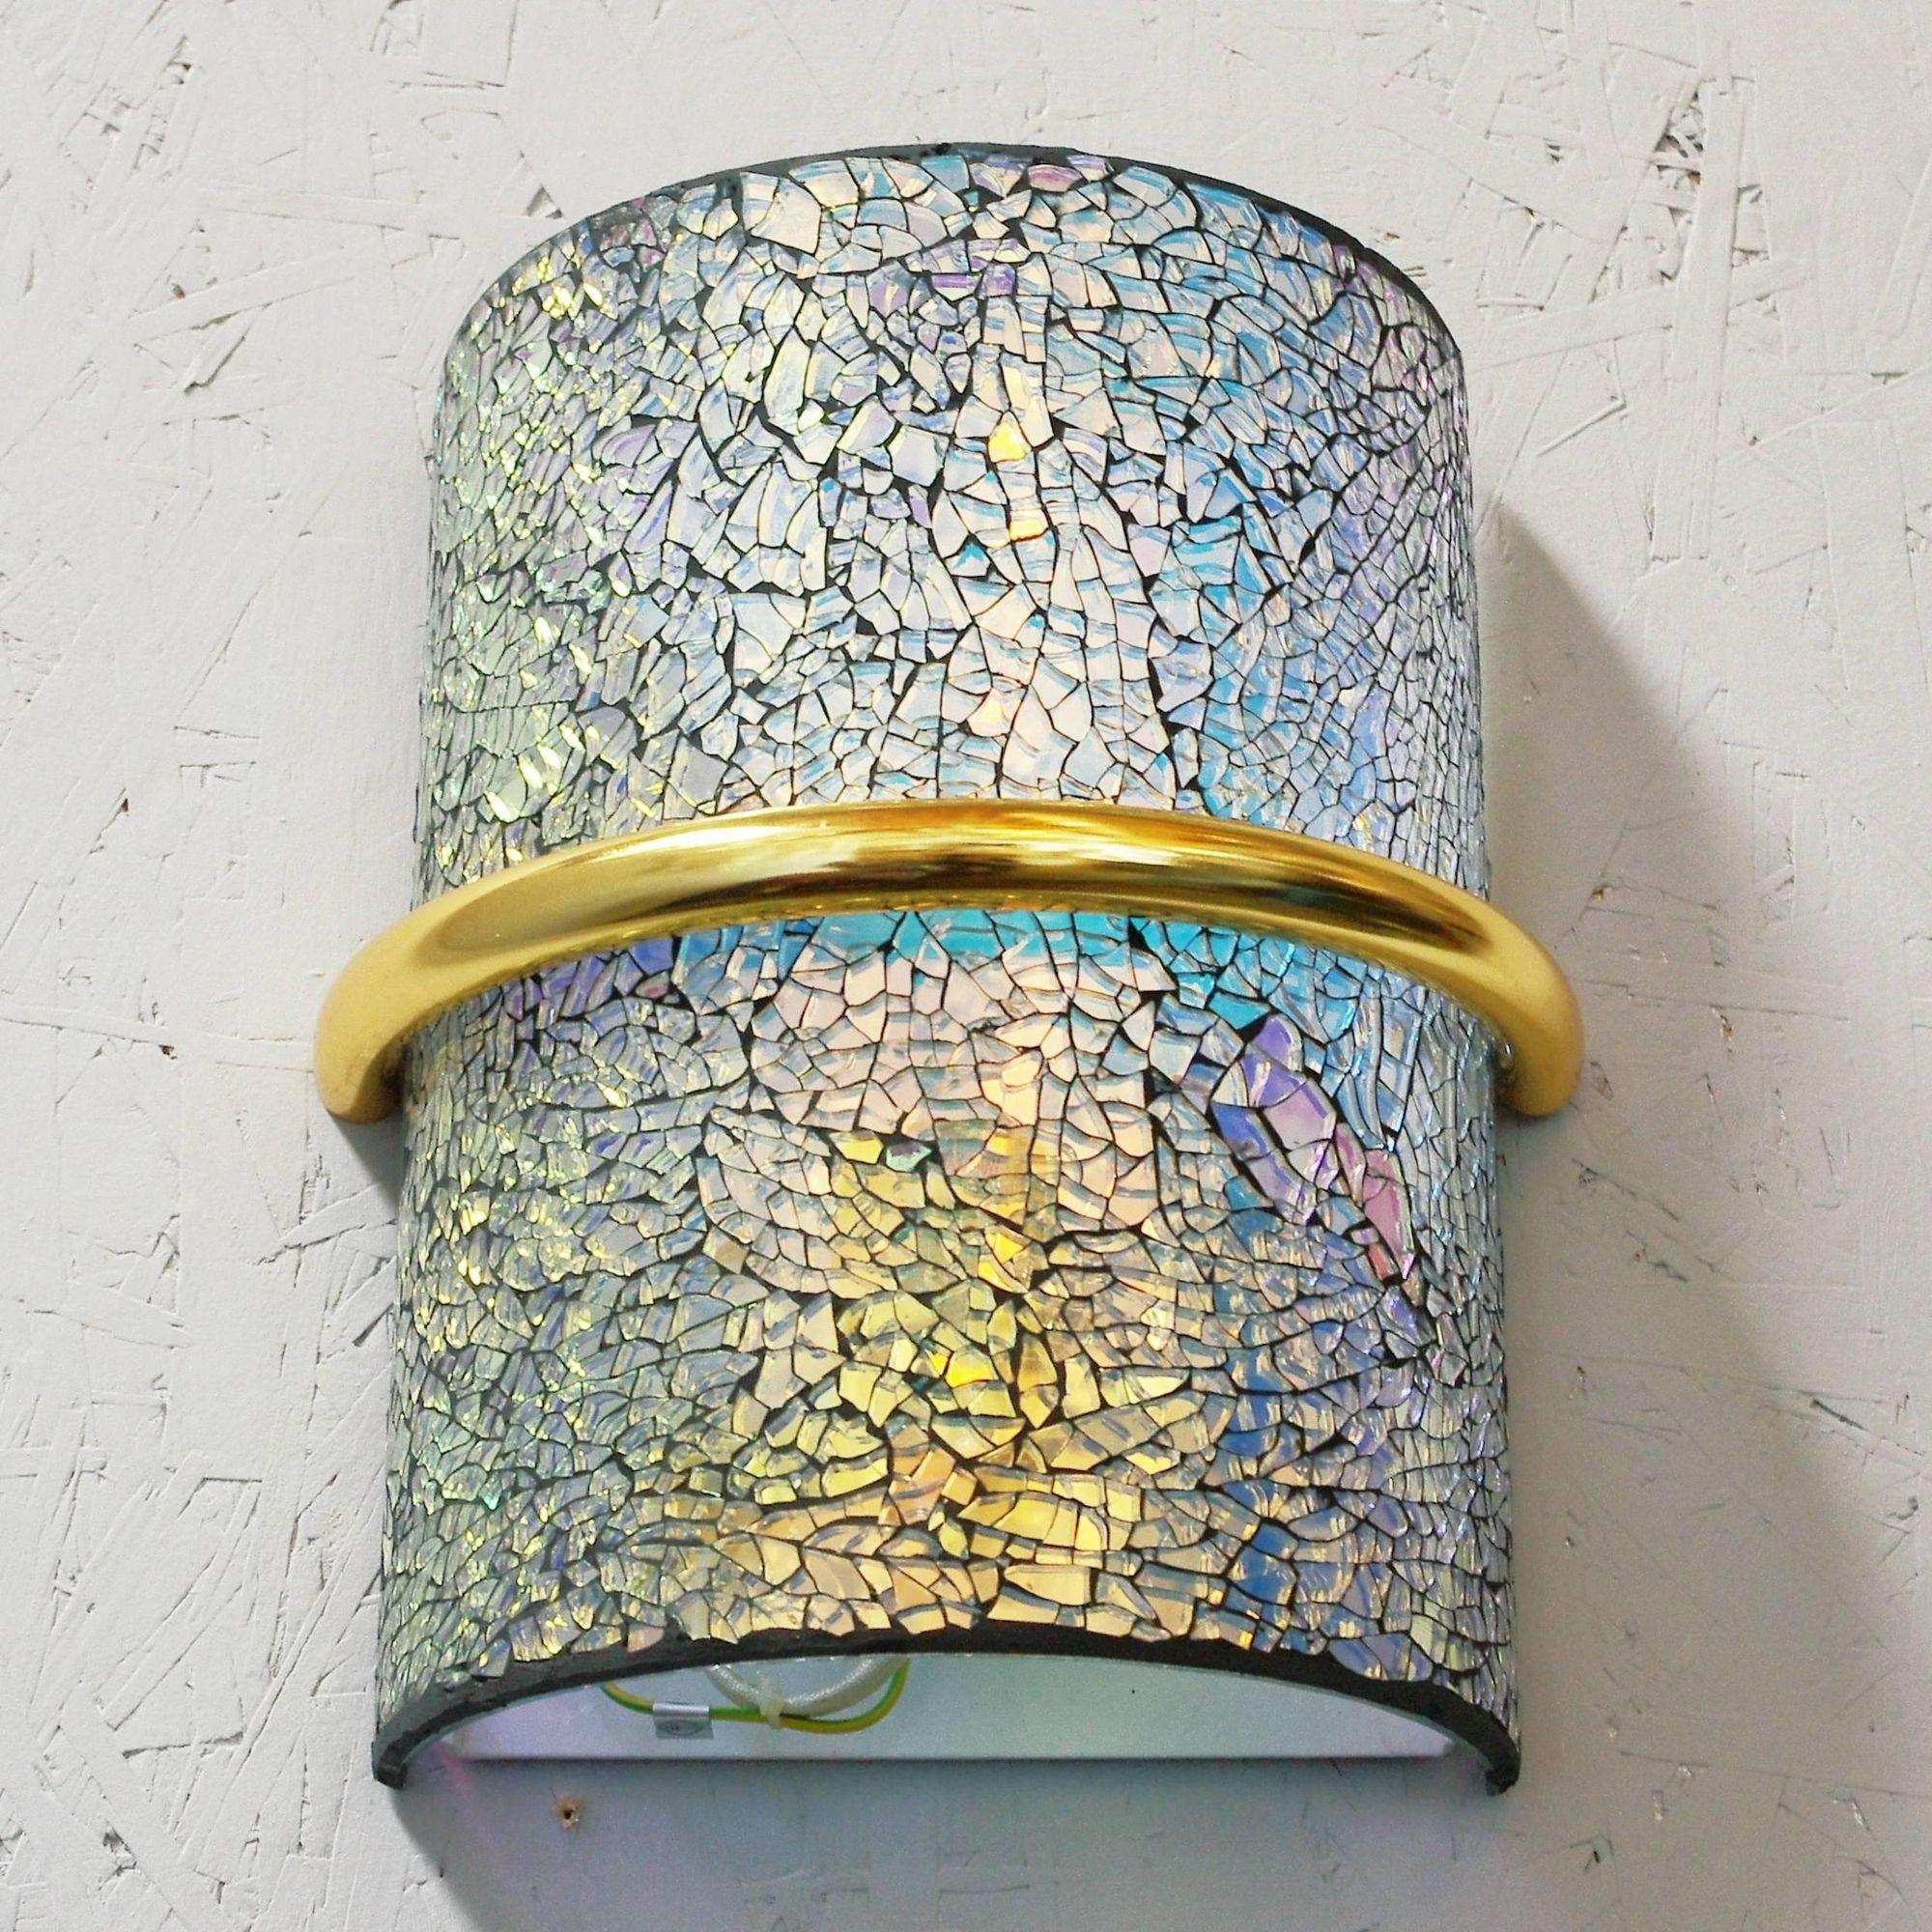 Italian Twelve Limited Edition Sconces with Crackled Iridescent Glass, 1990s For Sale